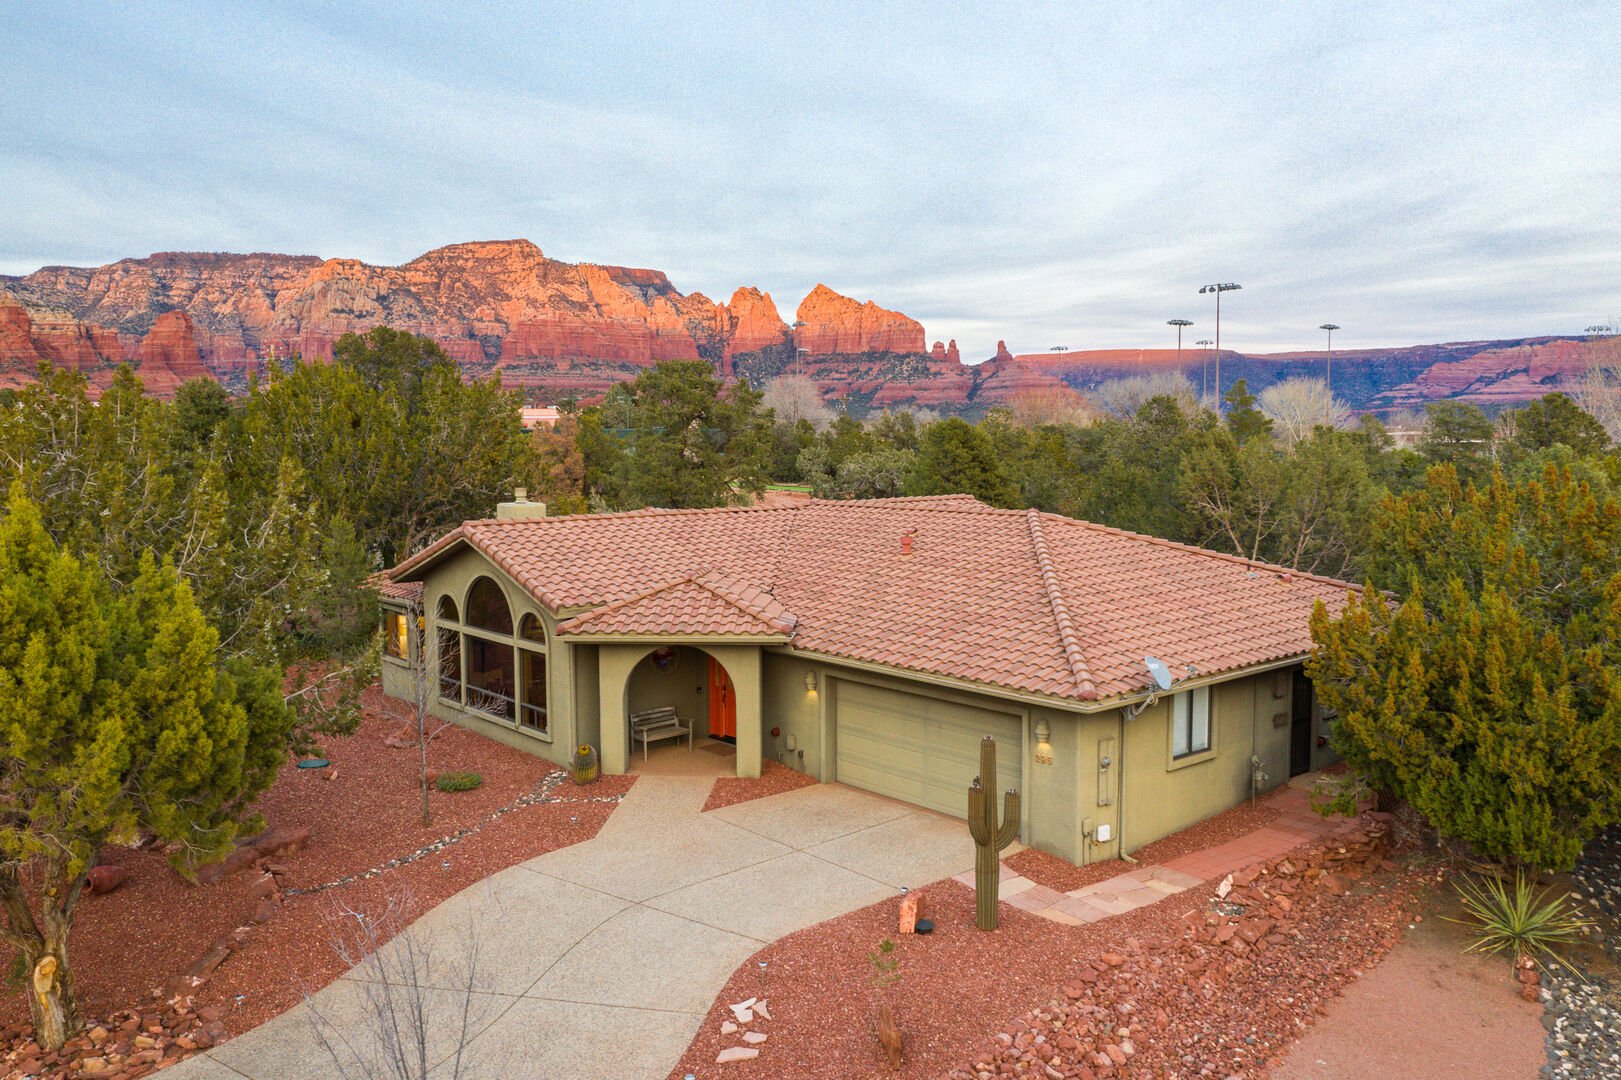 Located in West Sedona with Red Rock views